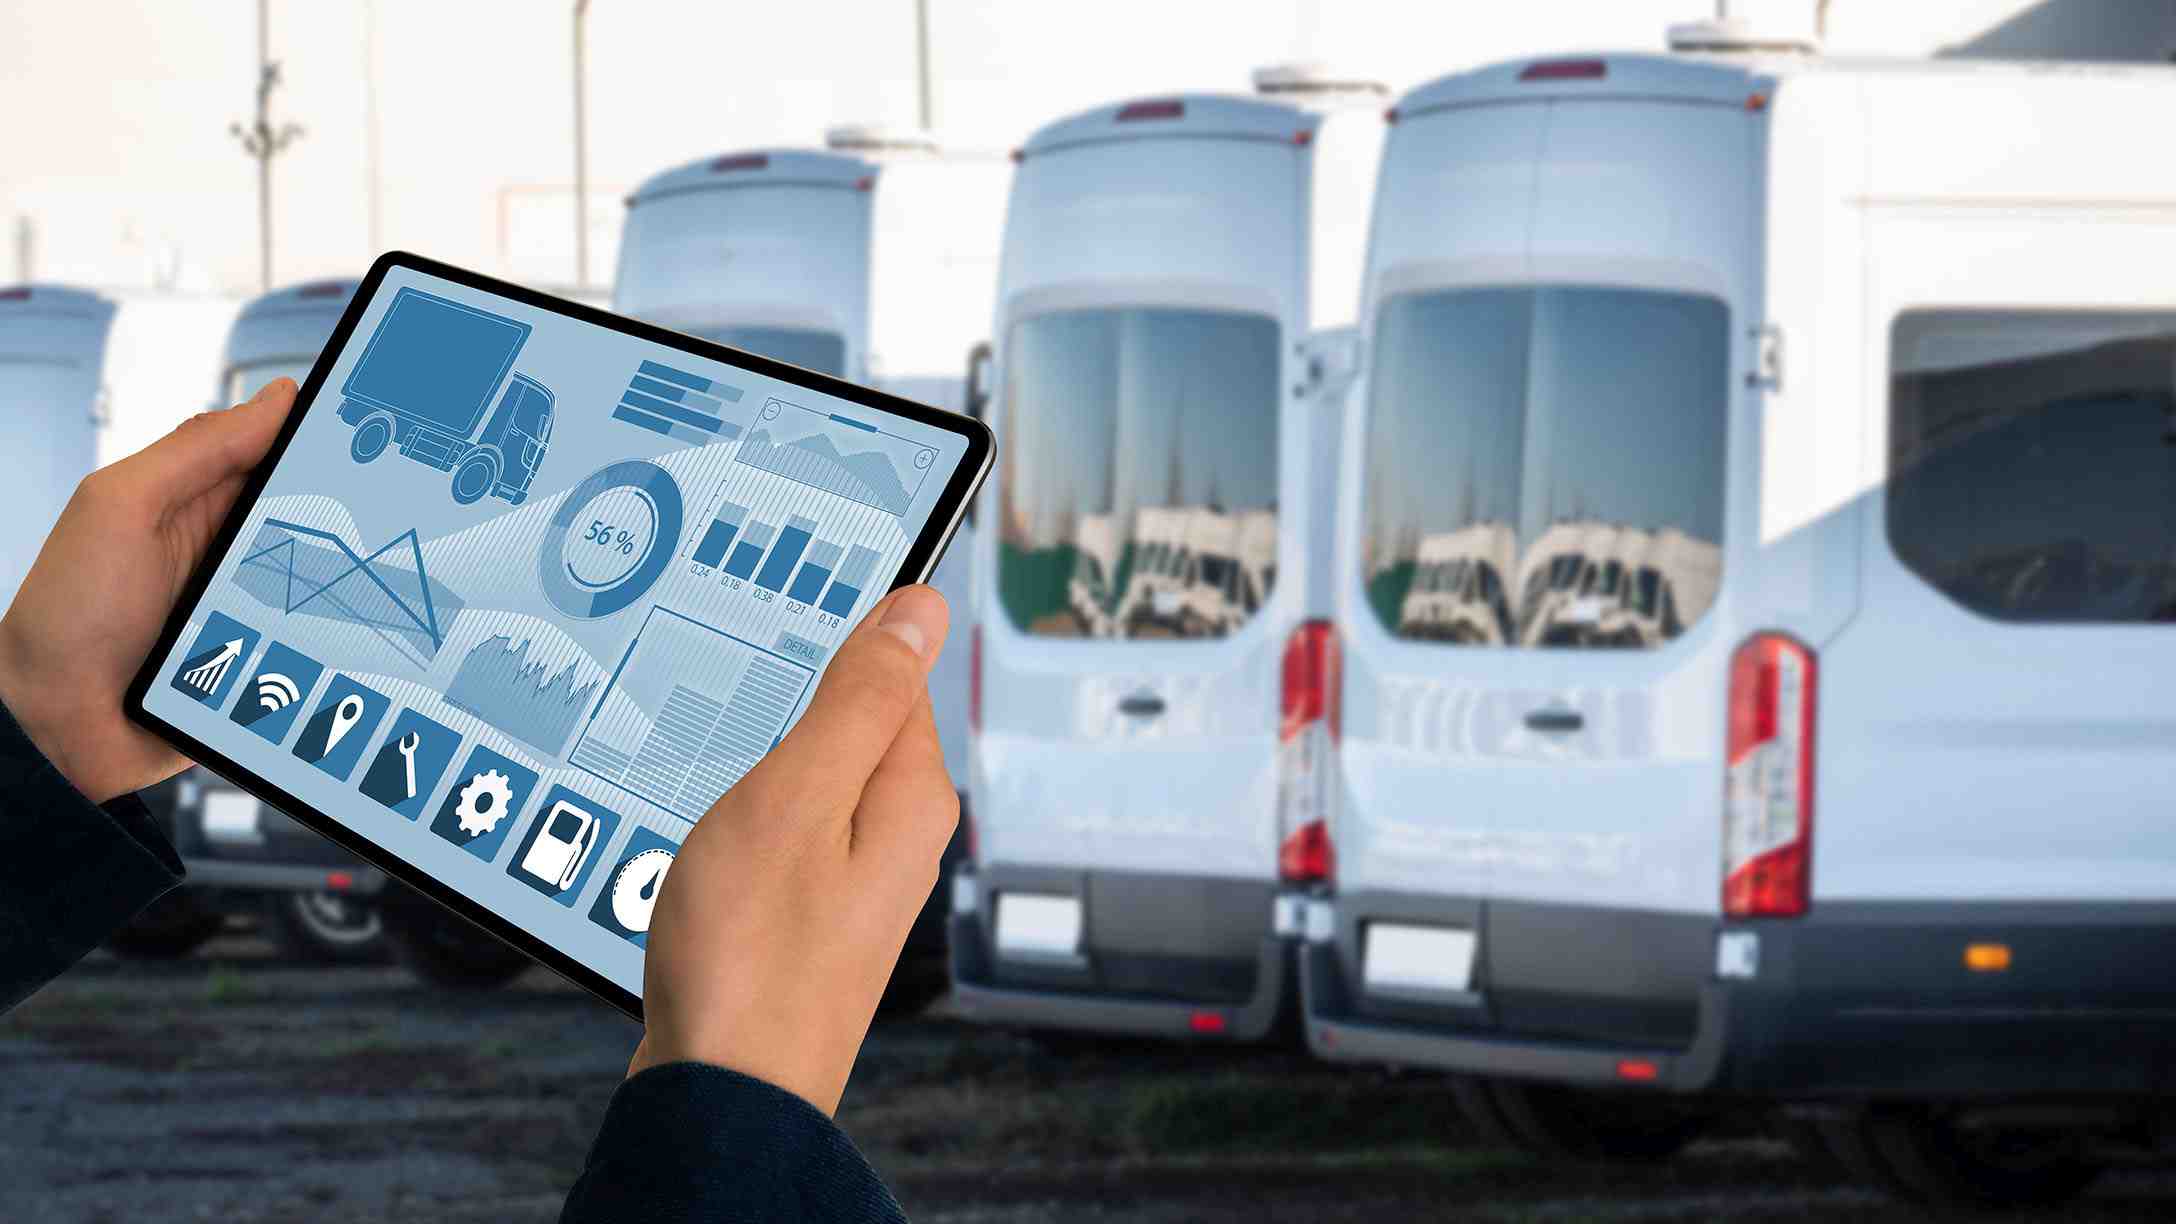 Person standing near vehicles while looking at the analytics of the vehicles on a tablet